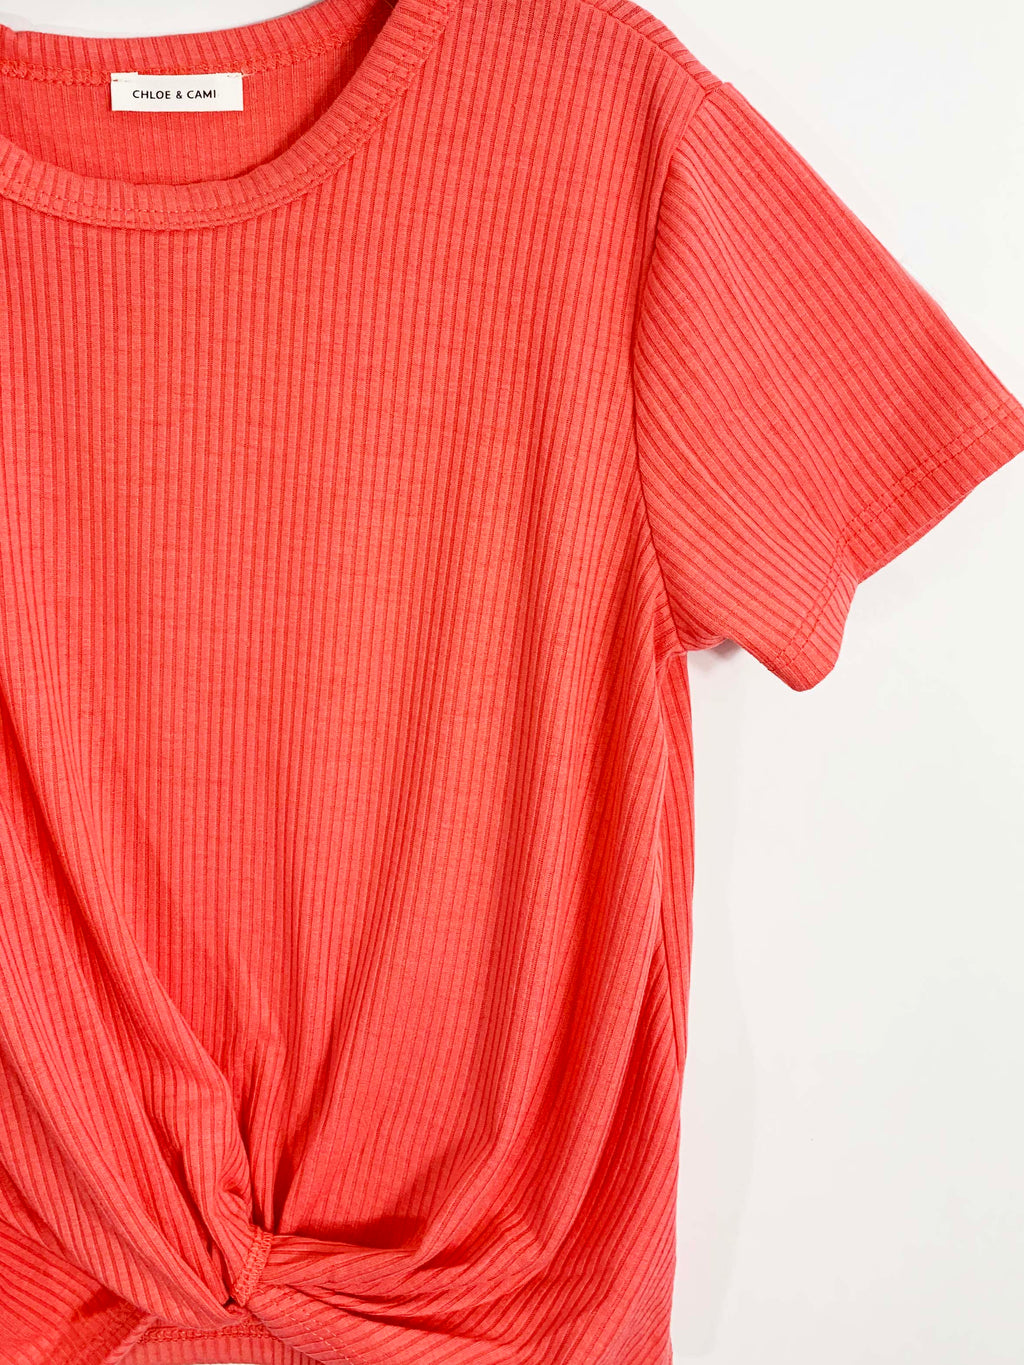 SHORT SLEEVE CORAL KNOTTED TOP